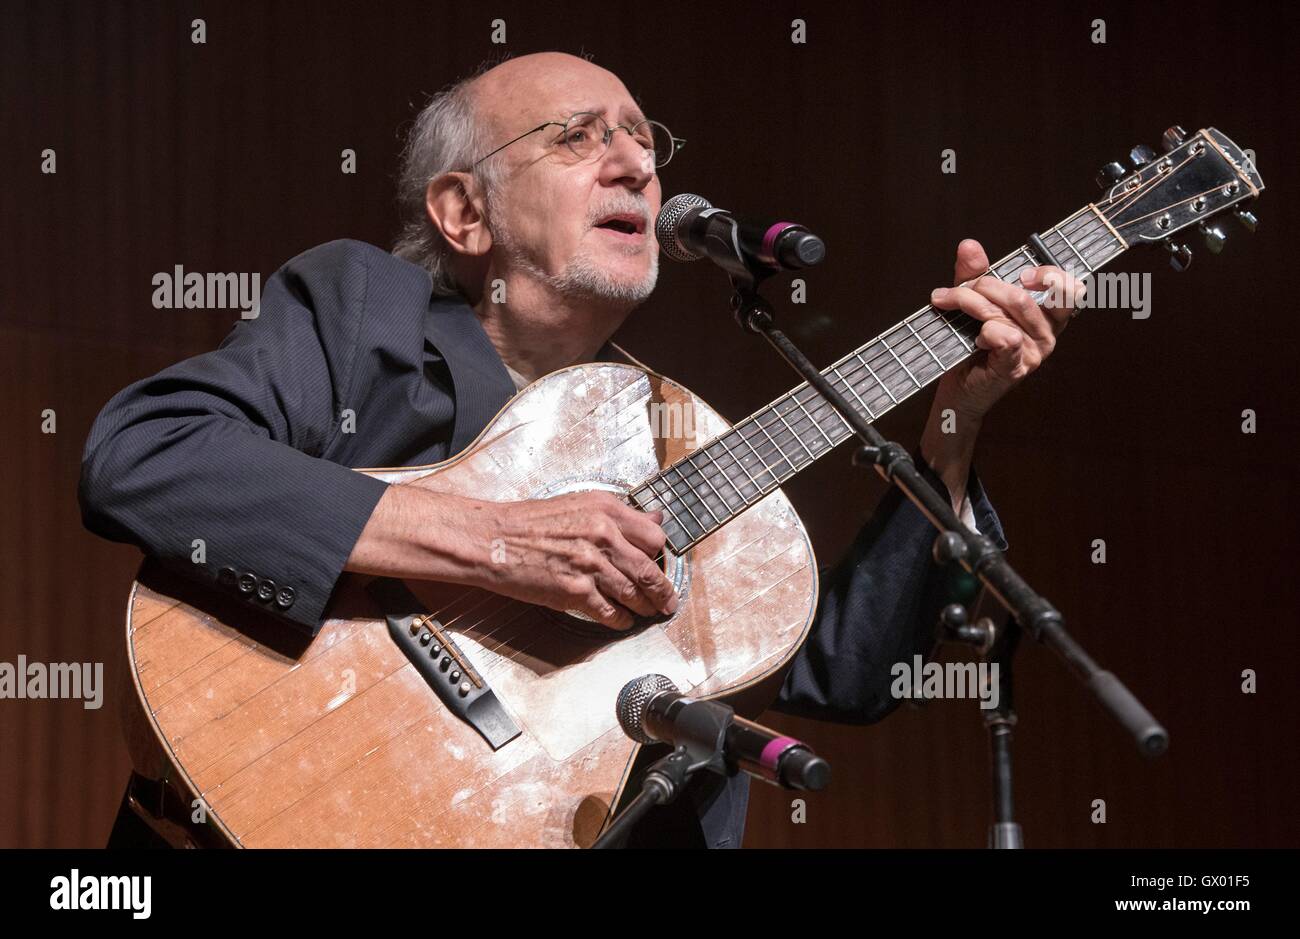 Folk Singer Pete Yarrow sings and plays guitar during an event at the LBJ Presidential Library April 28, 2016 in Austin, Texas. The event was part of the library's three-day Vietnam War Summit. Stock Photo